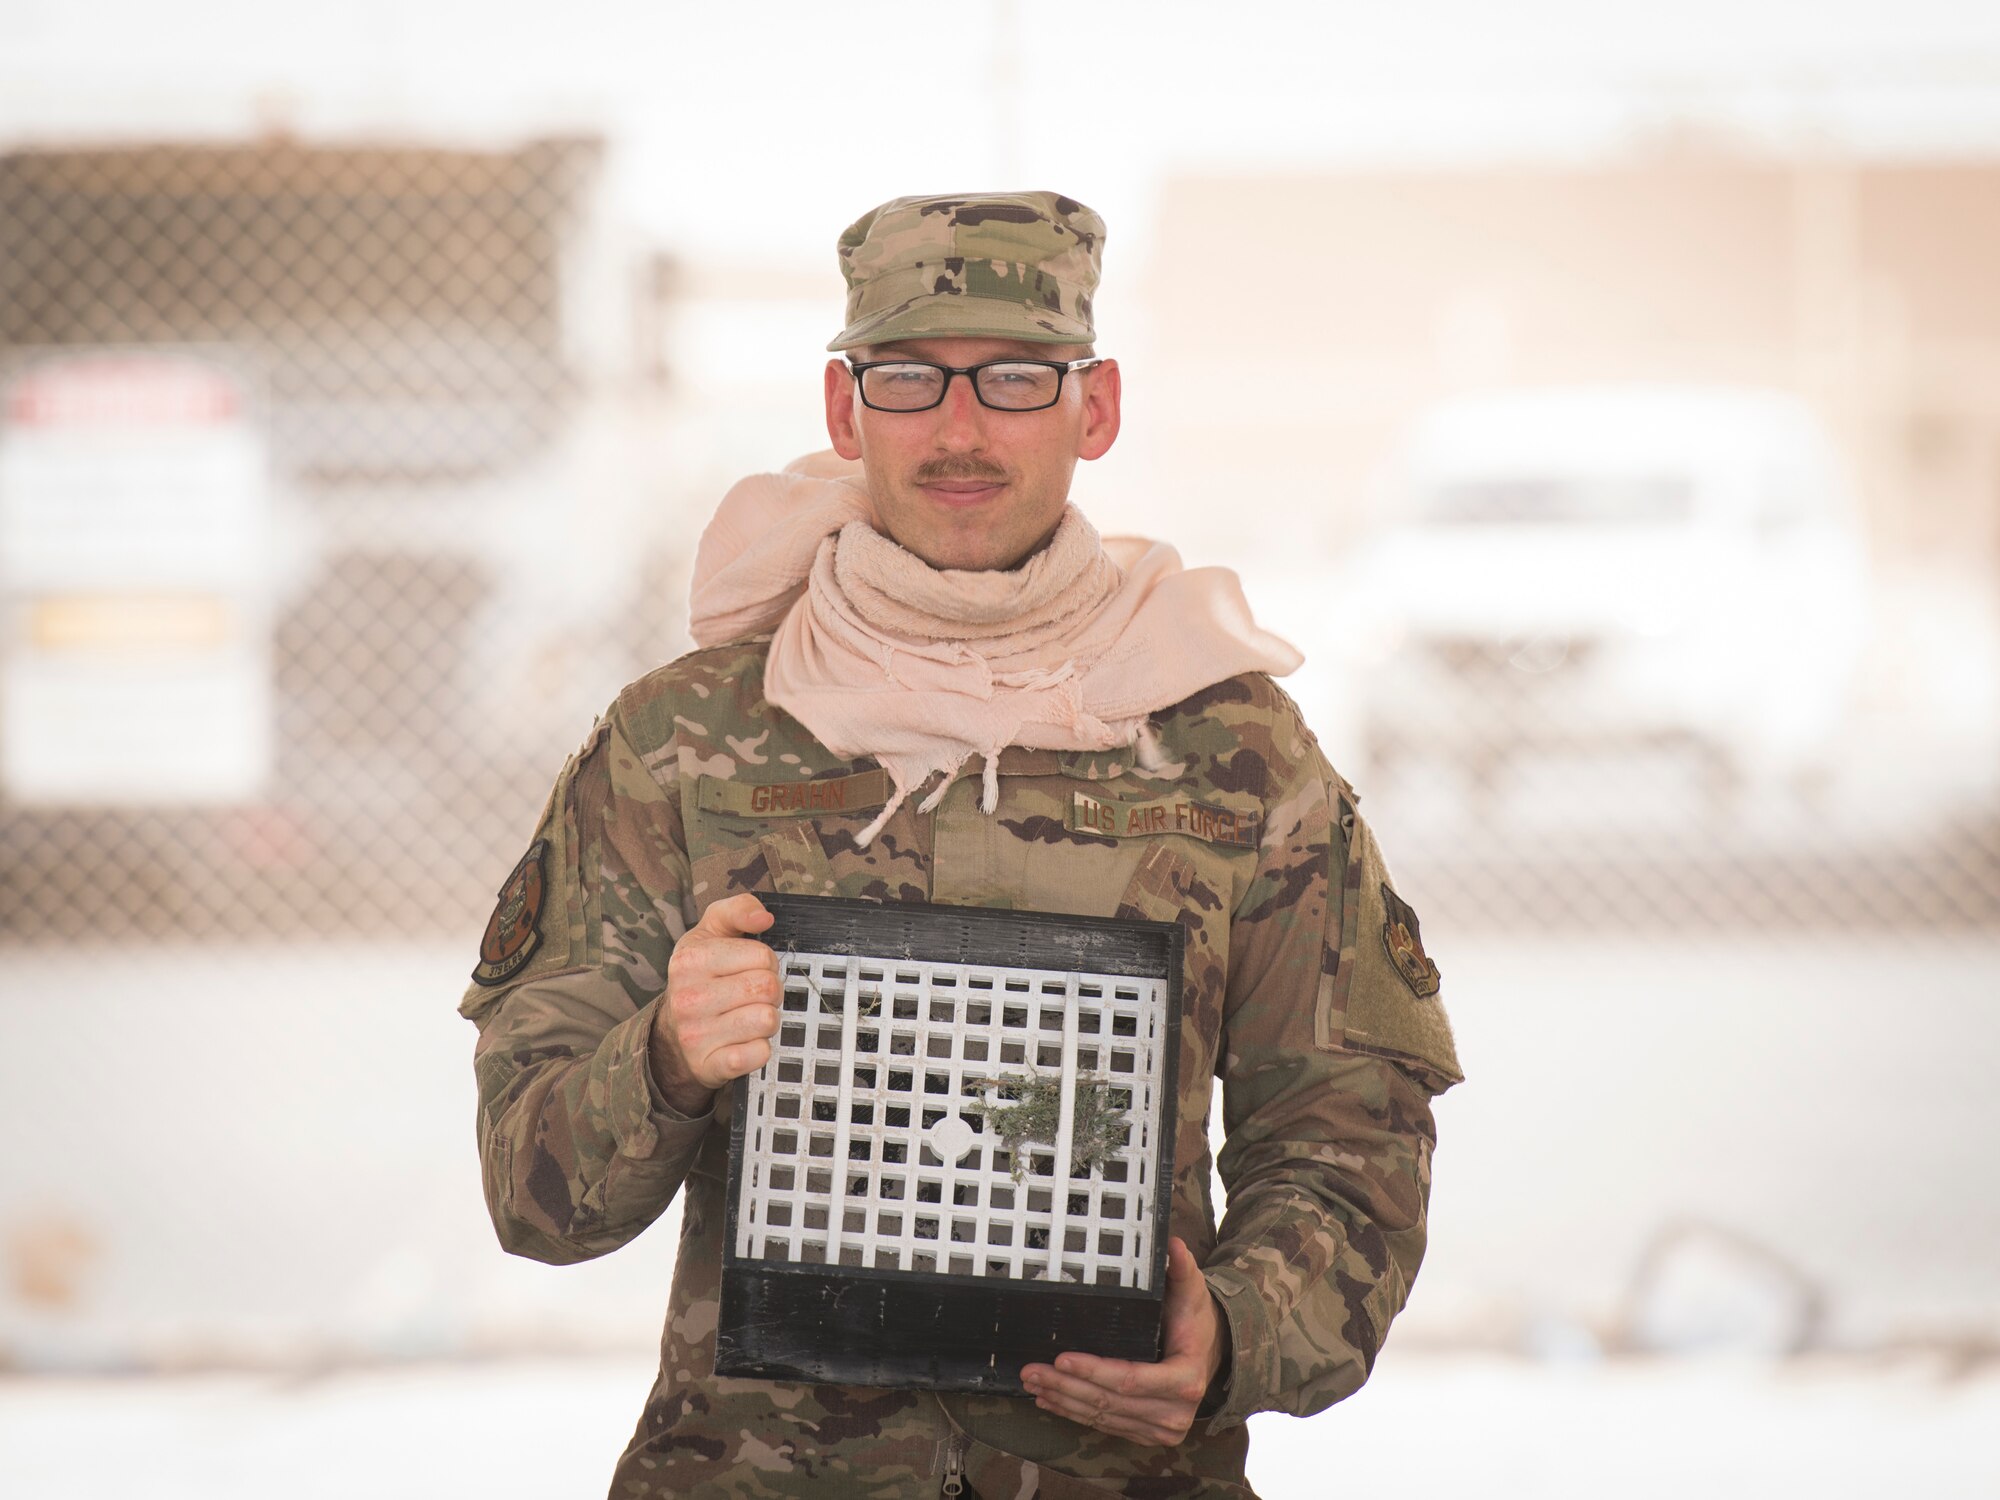 U.S. Air Force Staff Sgt. Justin Grahn, a vehicle operator assigned to the 379th Expeditionary Logistics Readiness Squadron, displays his team’s winning submission in the U.S. Air Forces Central Command Spark Tank competition at Al Udeid Air Base, Qatar, June 13, 2020.